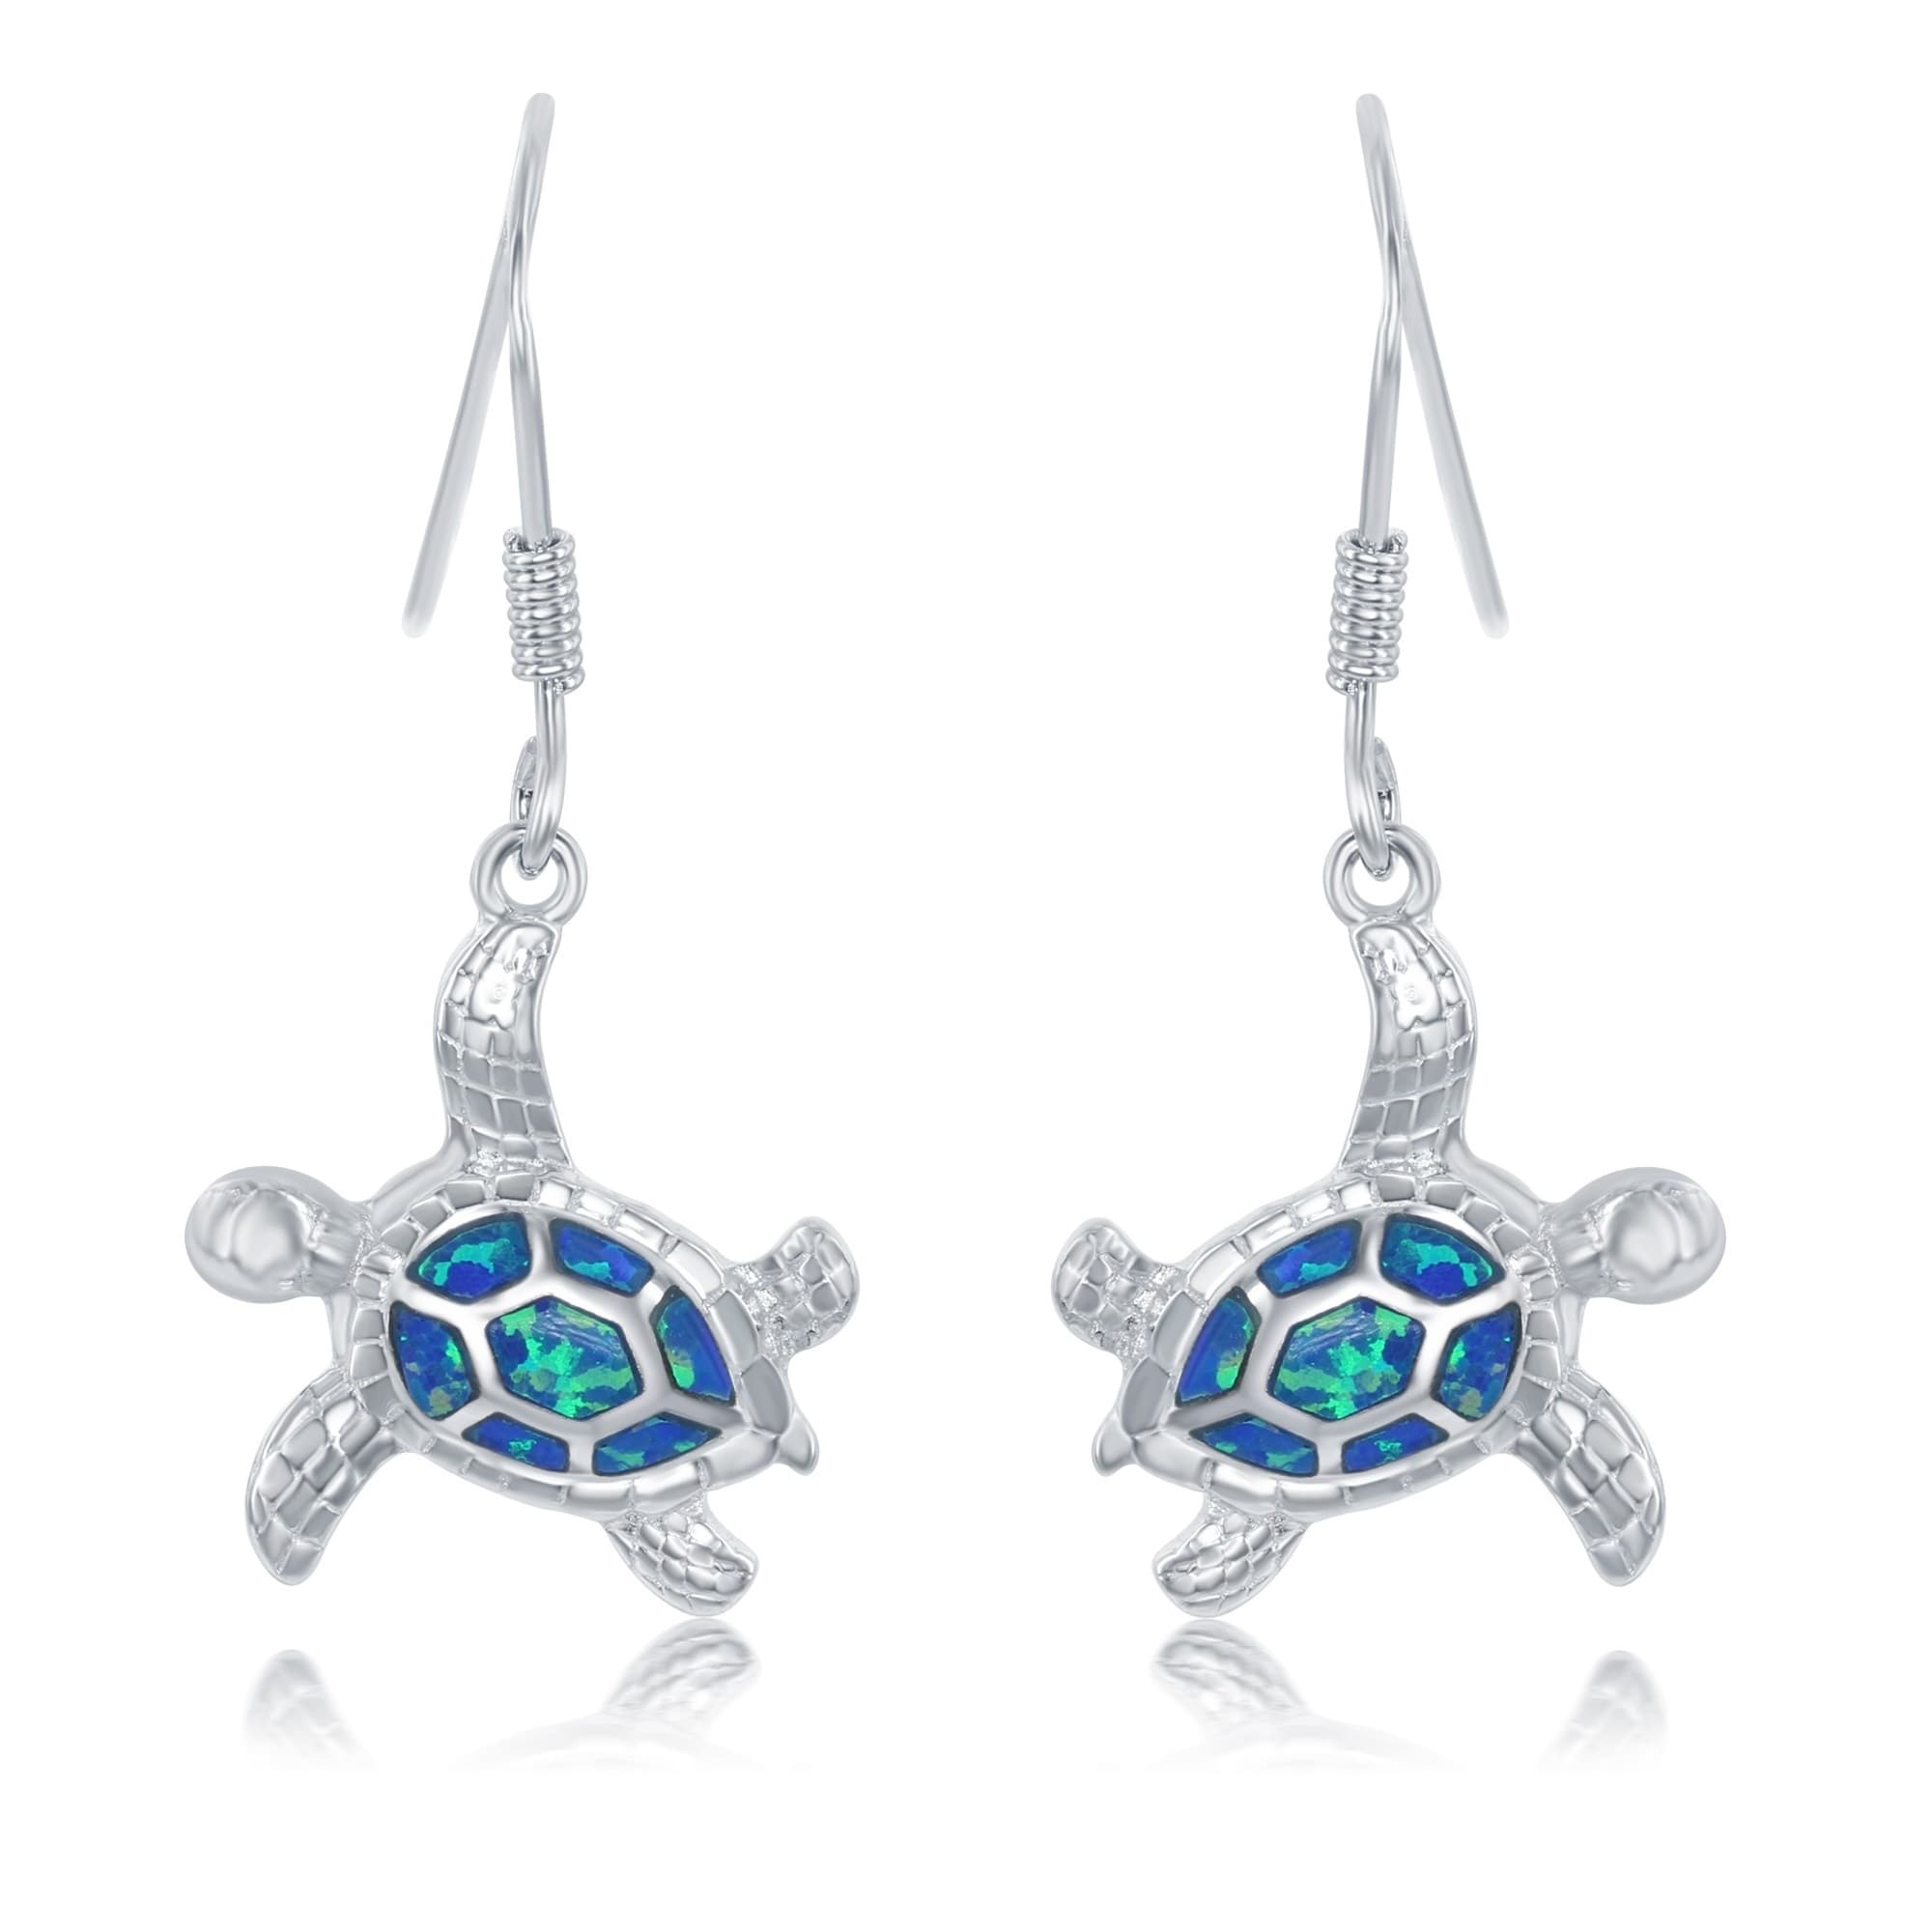 Silver and blue goldstone gemstone turtle charm earrings adorned with tiny dangling blue Czech glass beads.